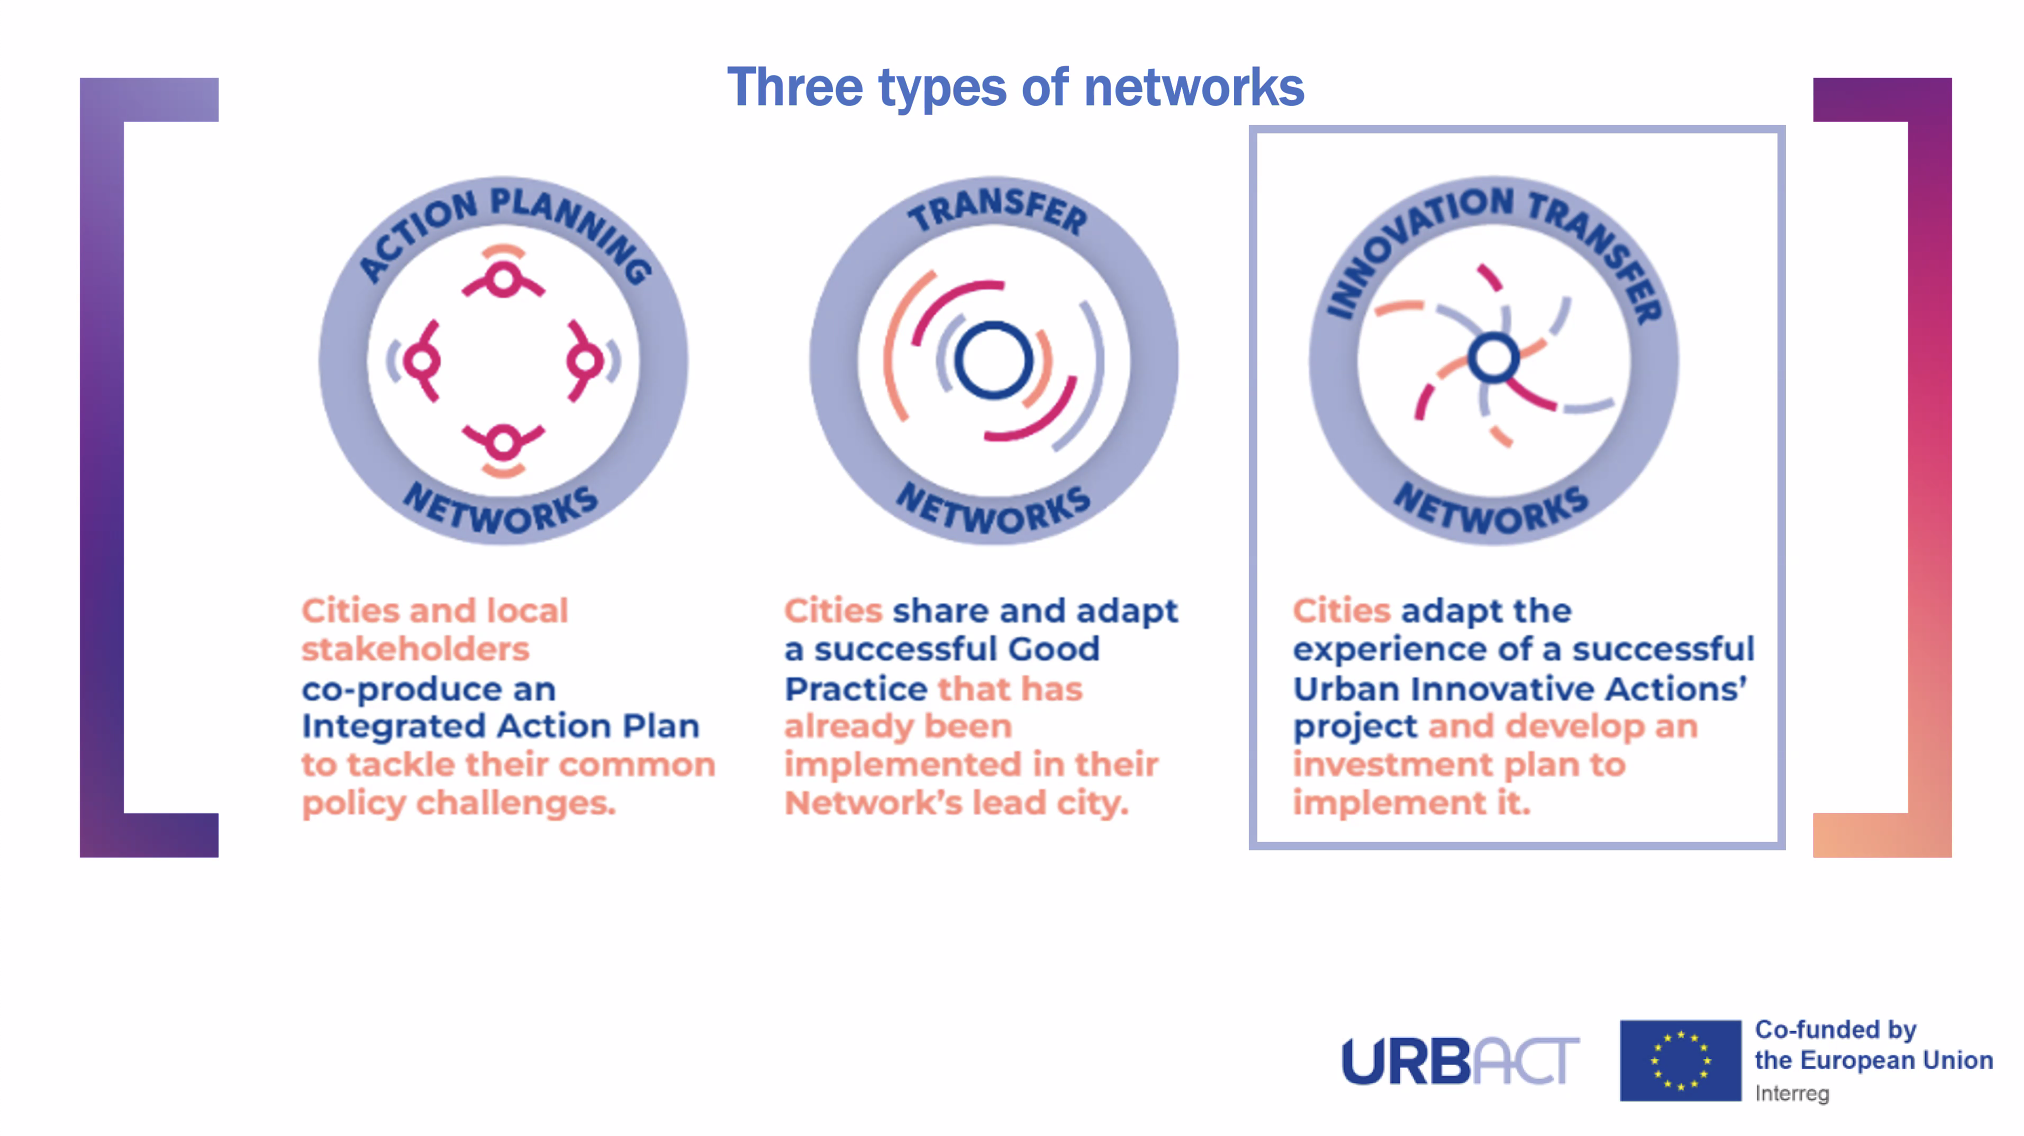 The three types of URBACT Networks